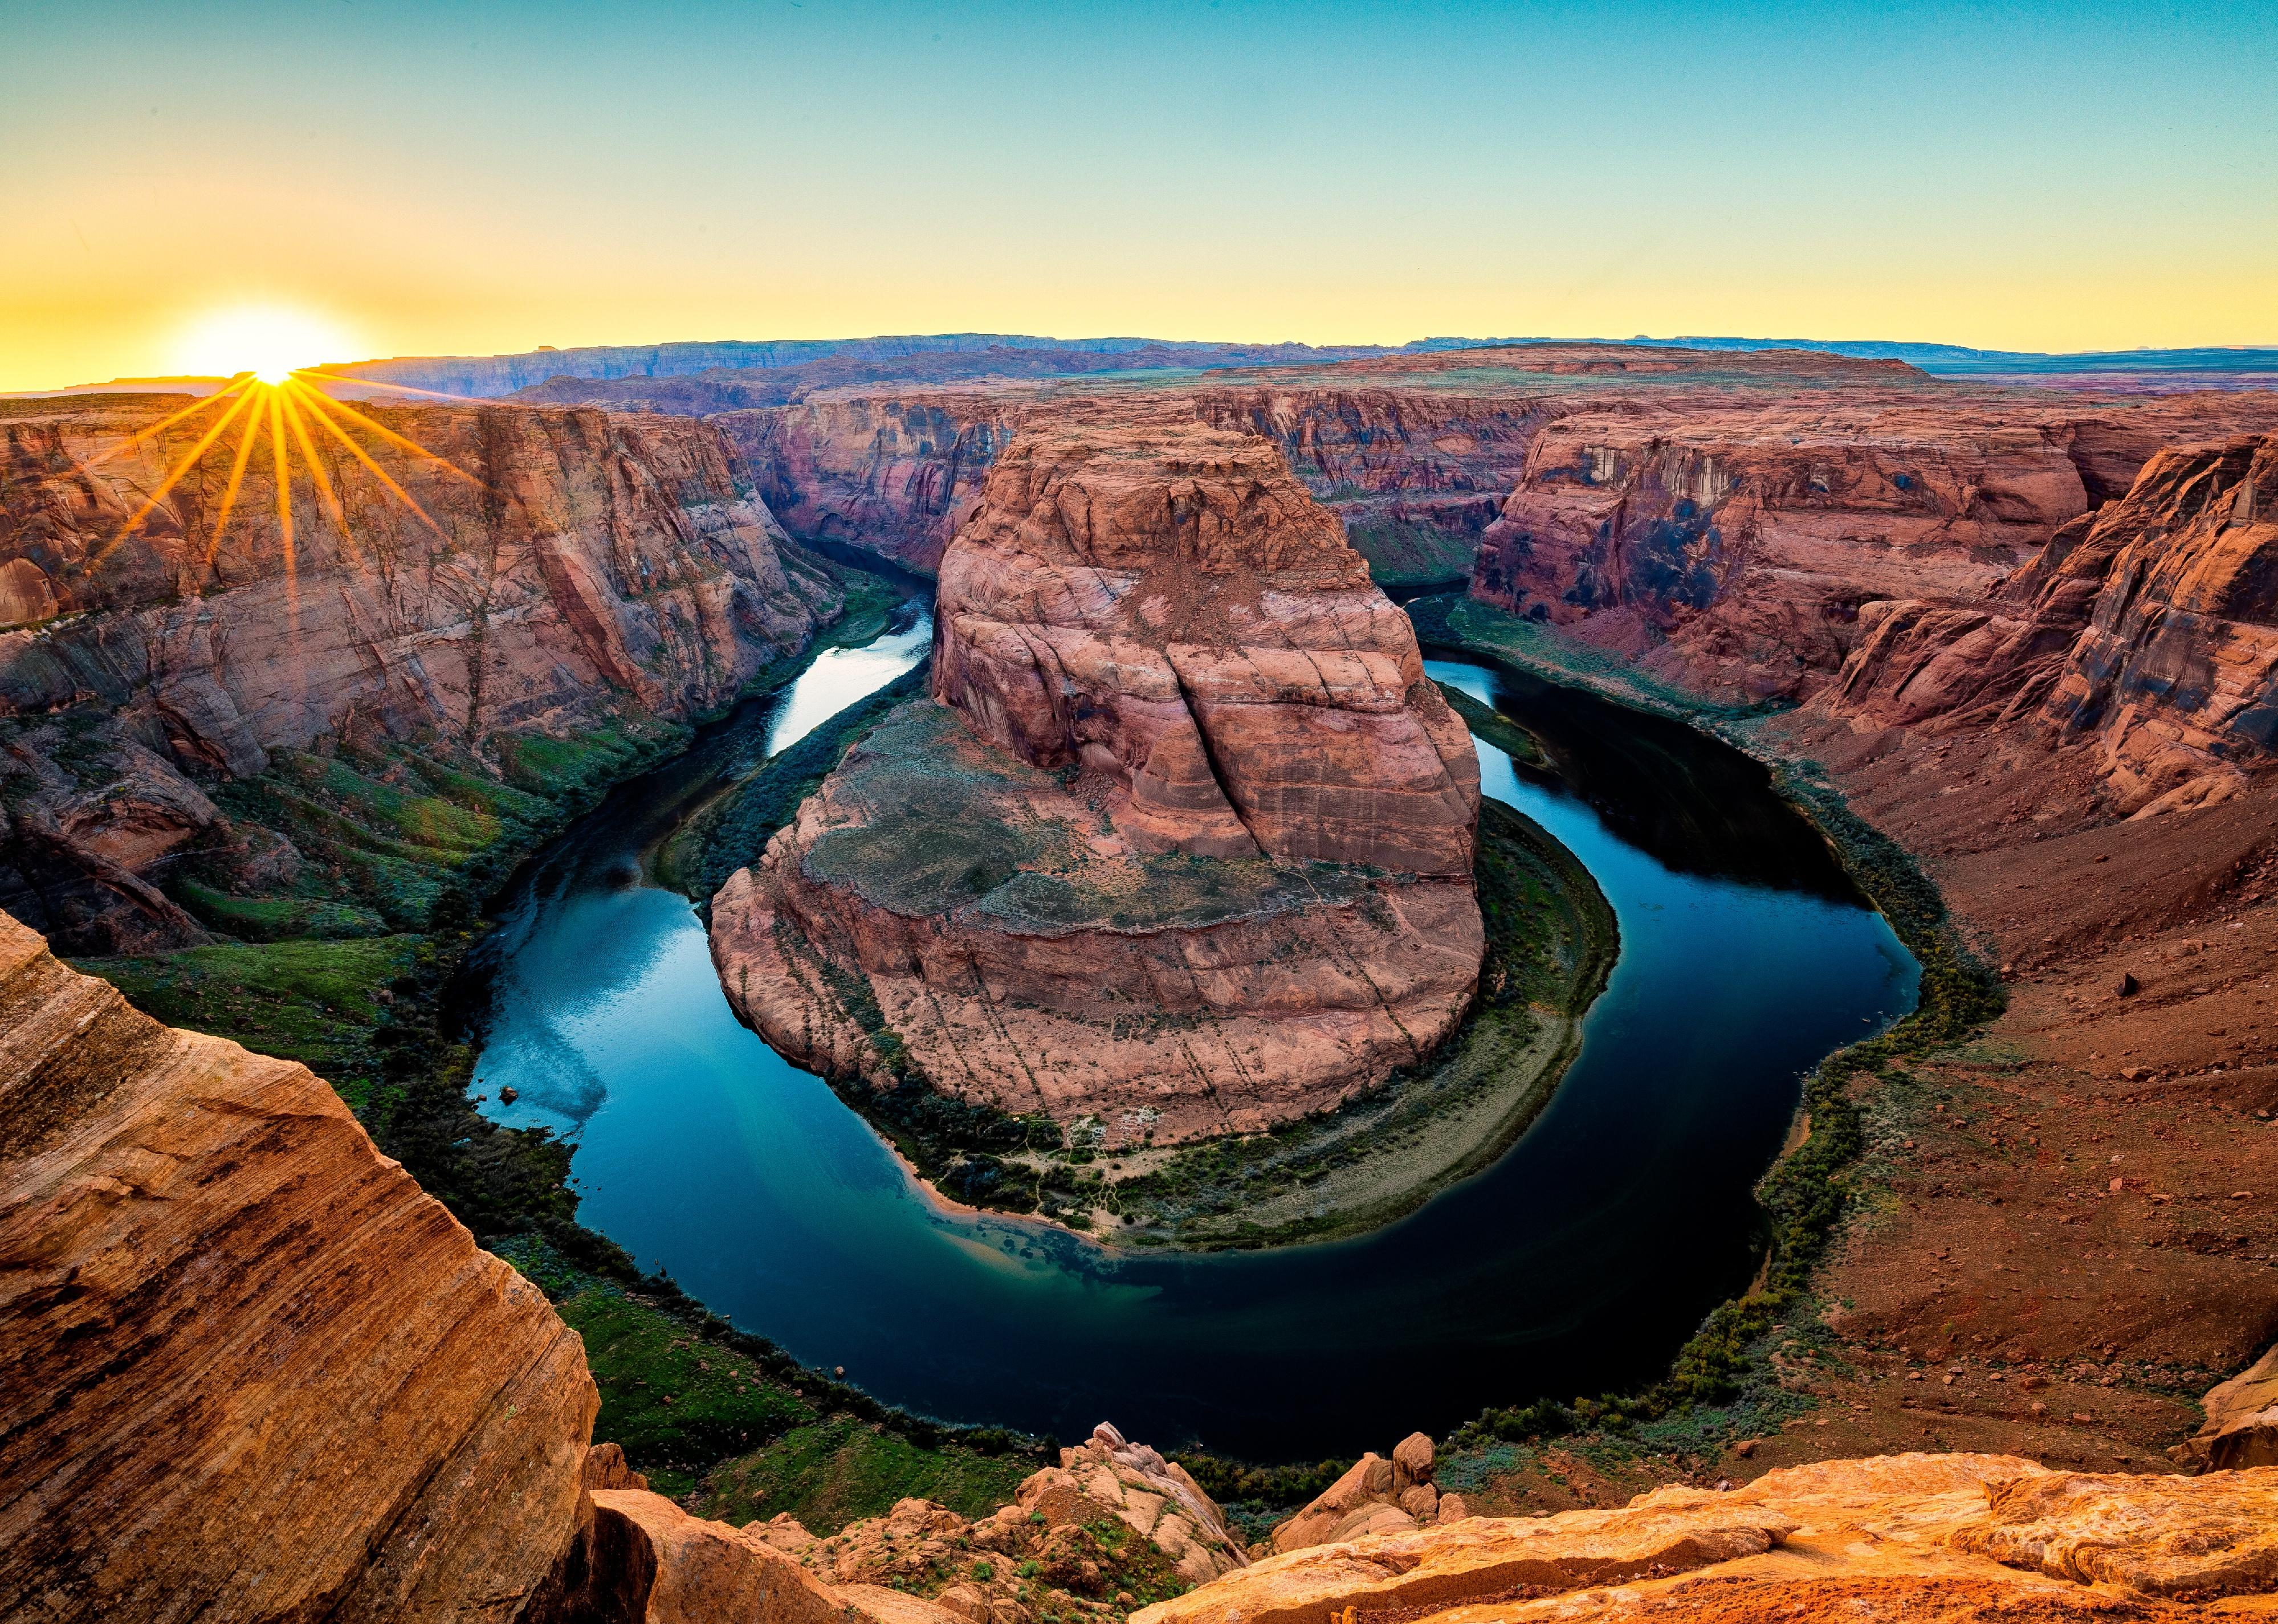 Horseshoe bend at sunset in Grand Canyon National Park.